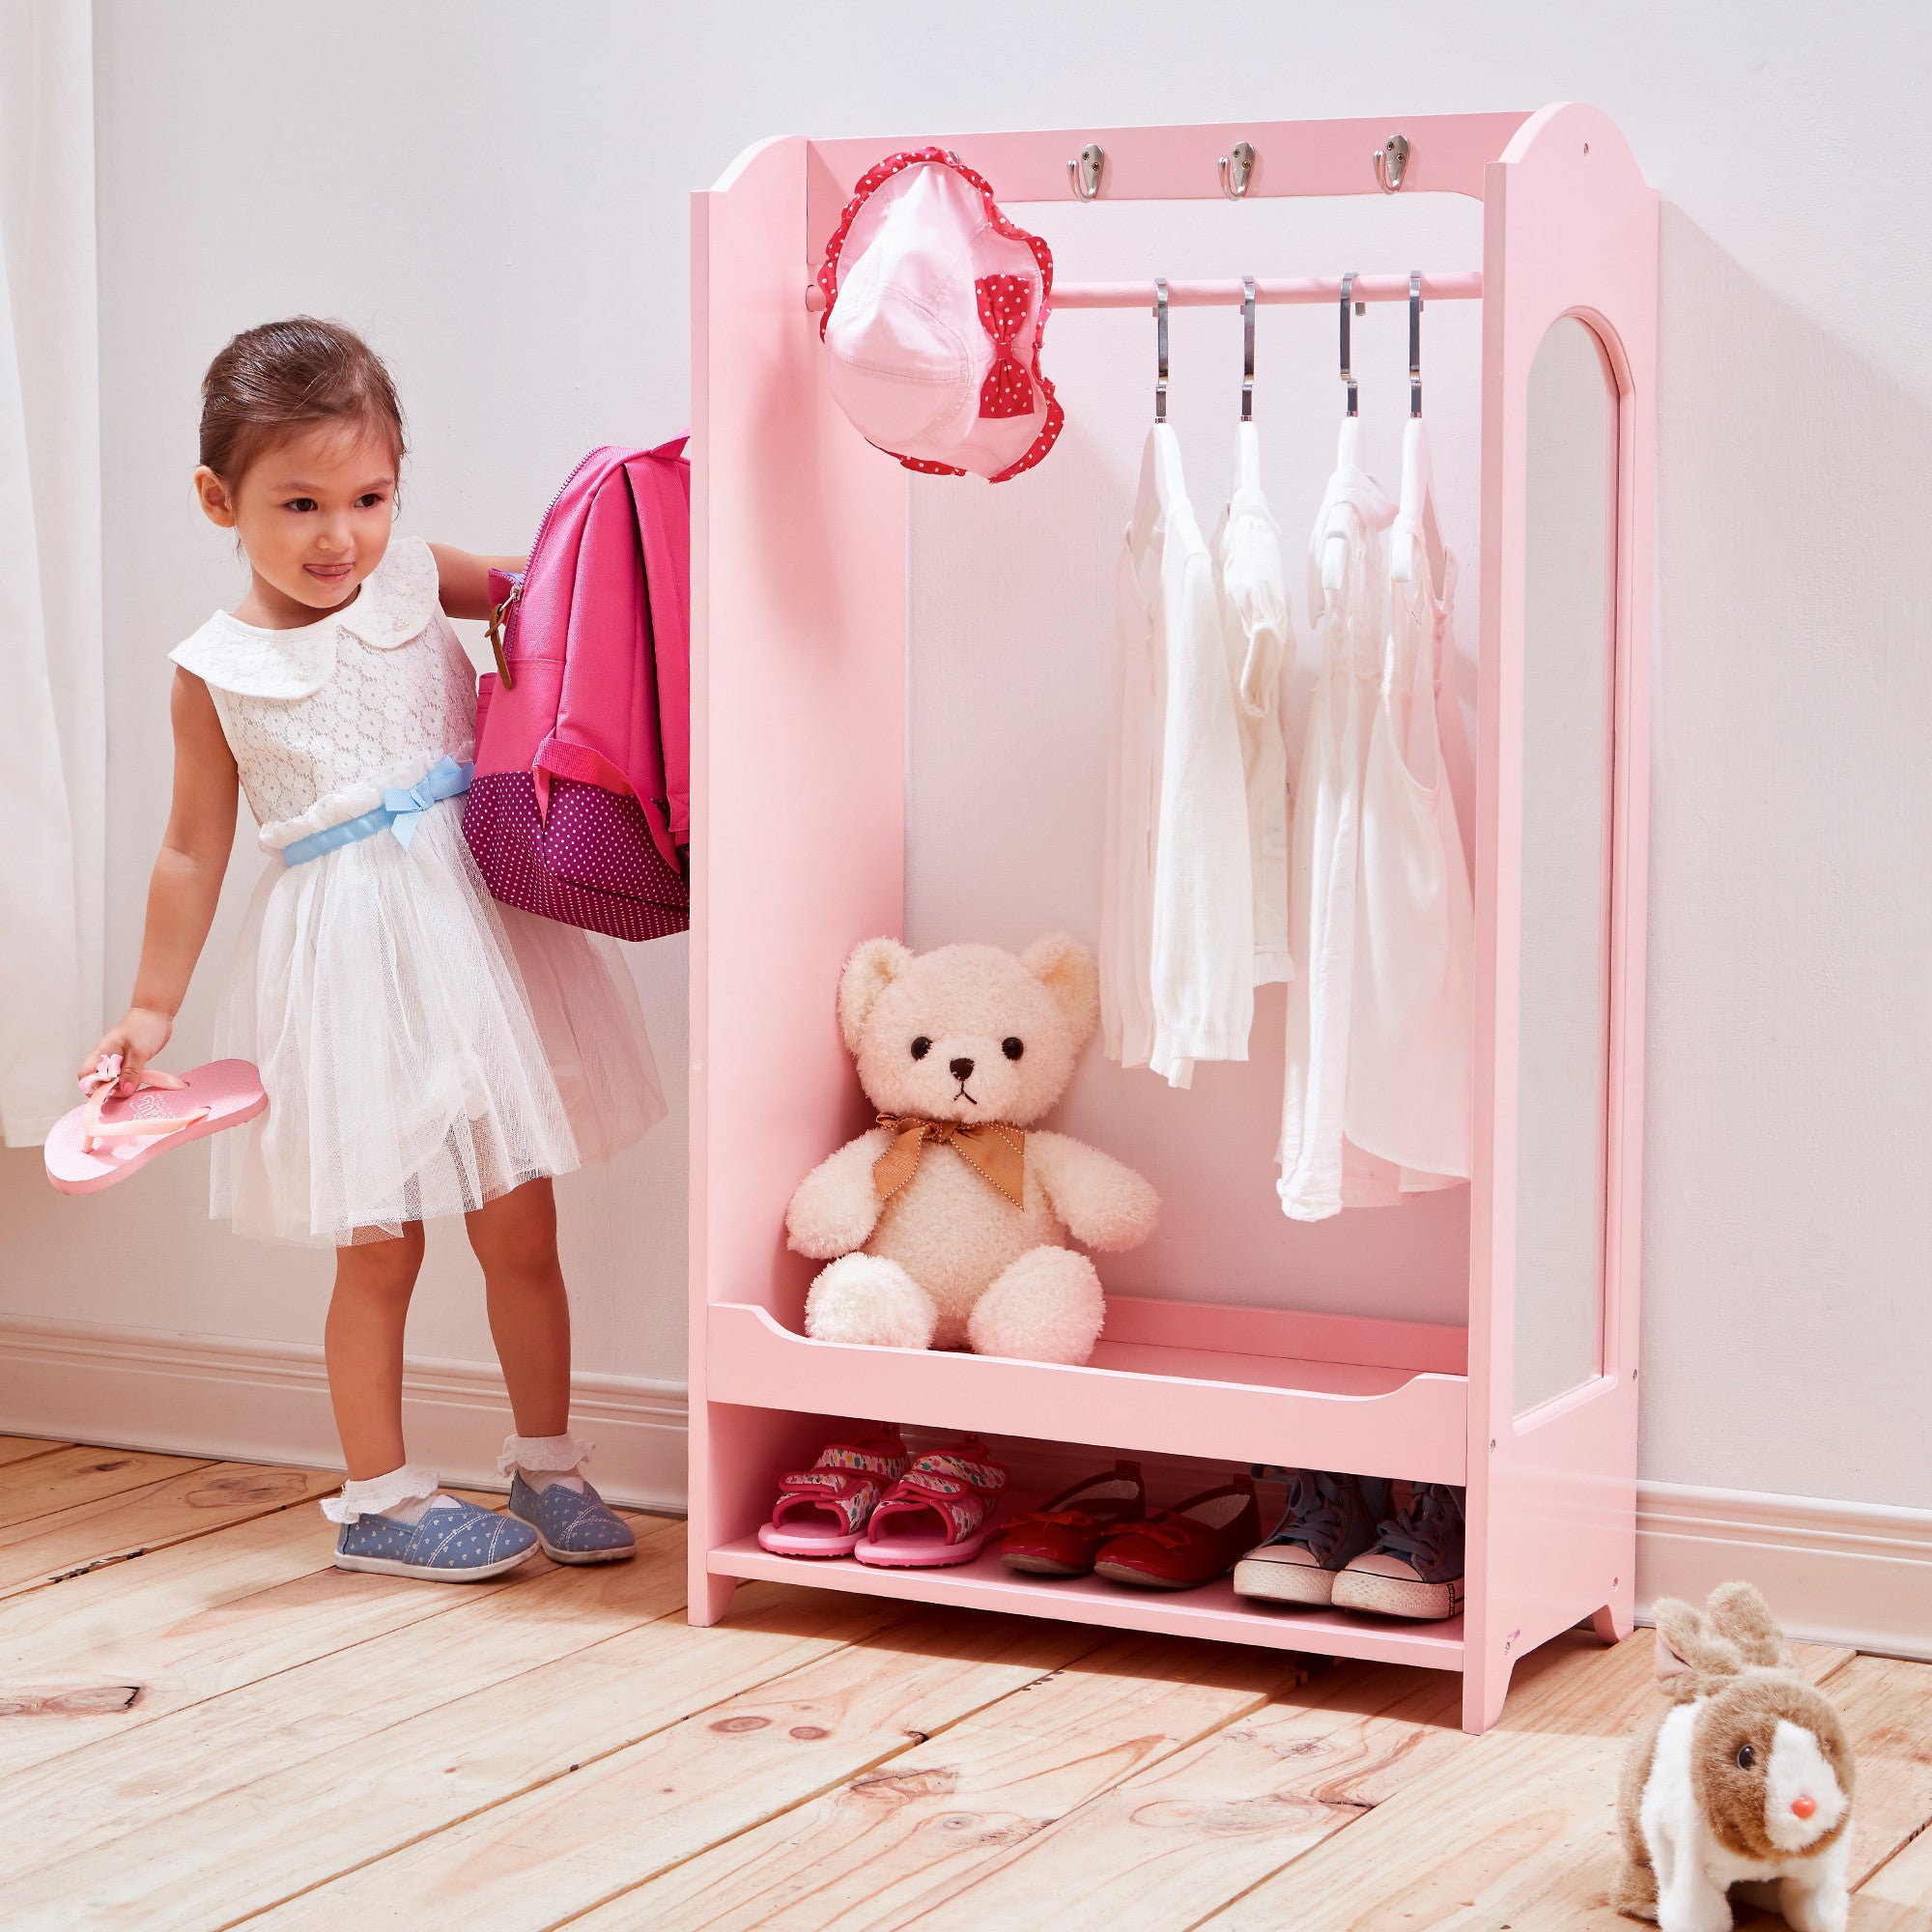 Fantasy Fields Little Princess Clothing Rack with Storage, Pink